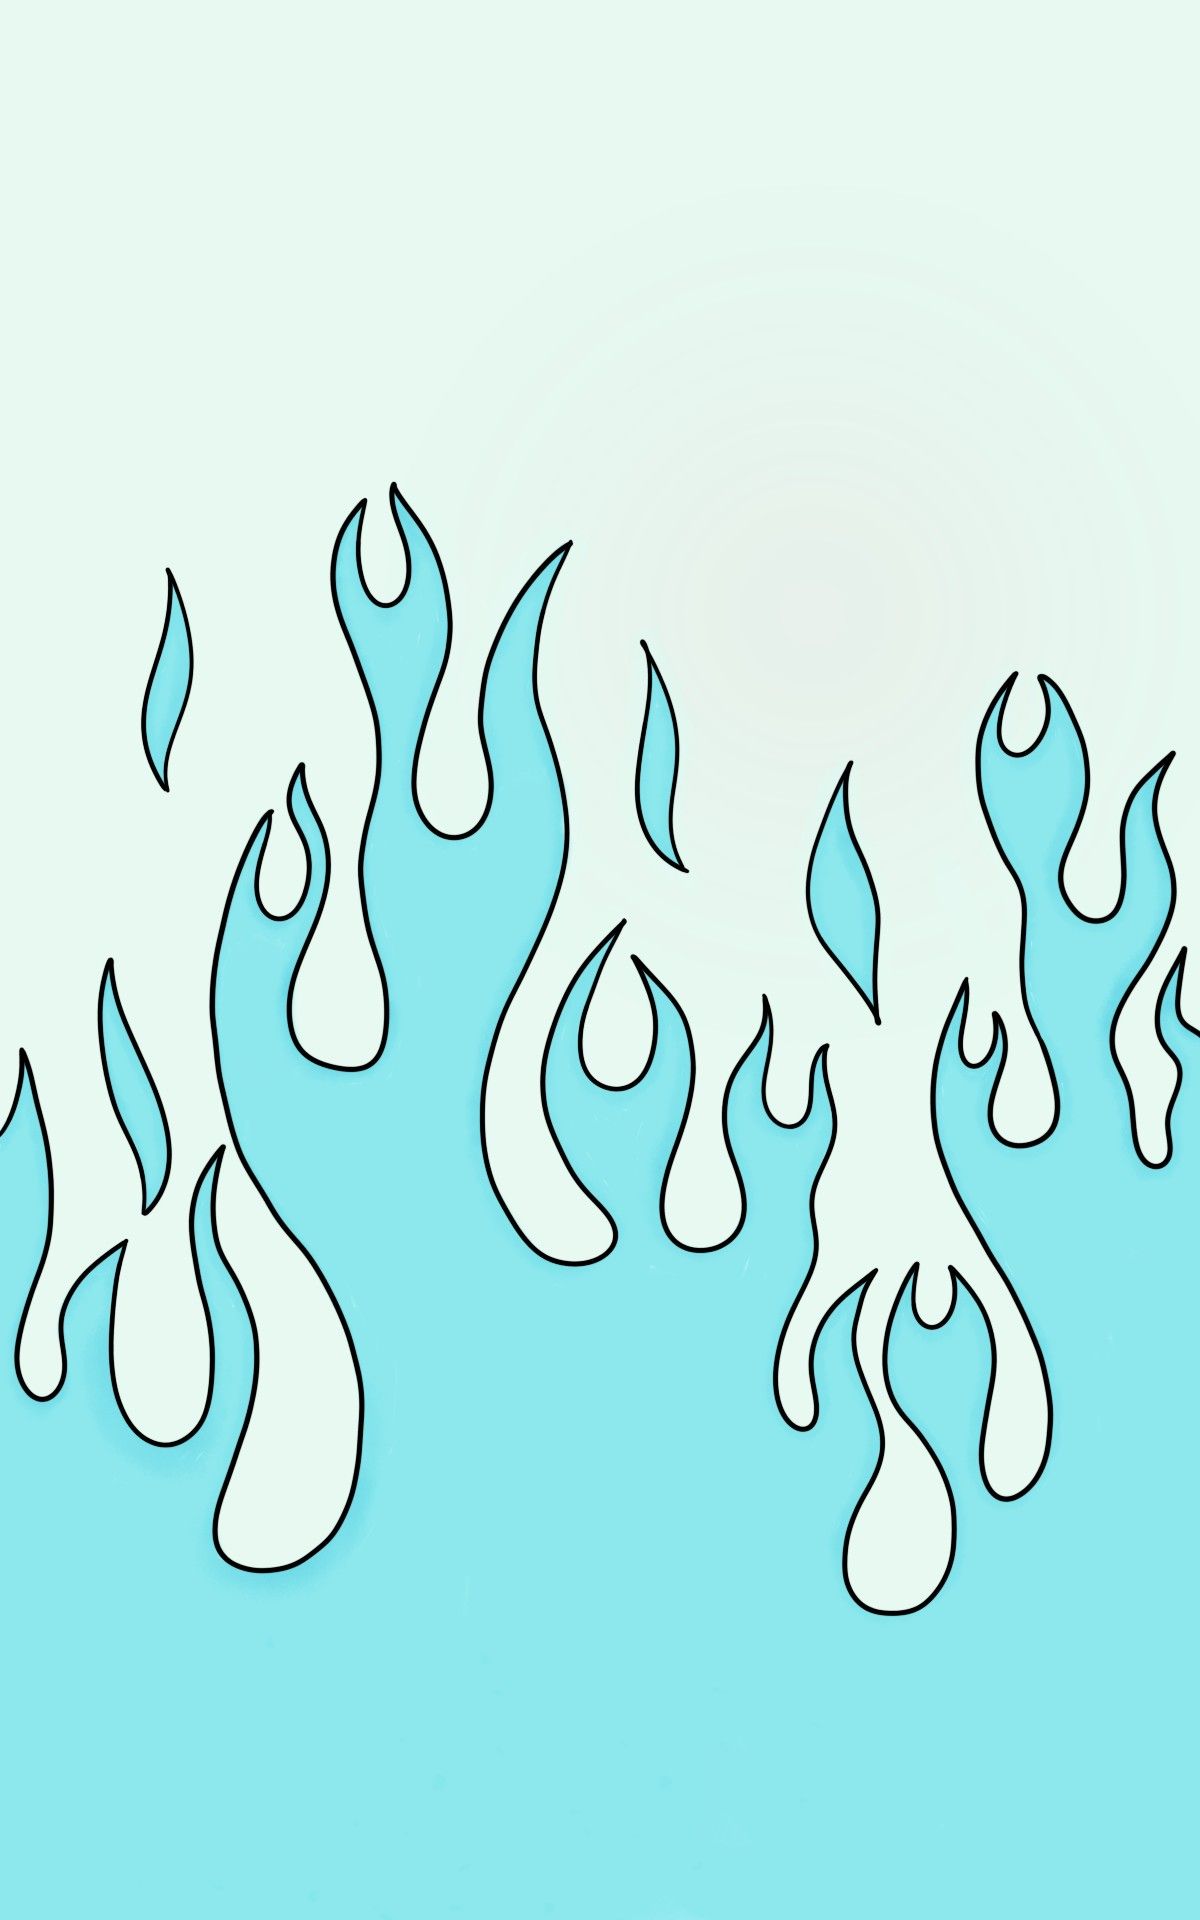 A blue flame pattern on a light blue background - Fire, flames